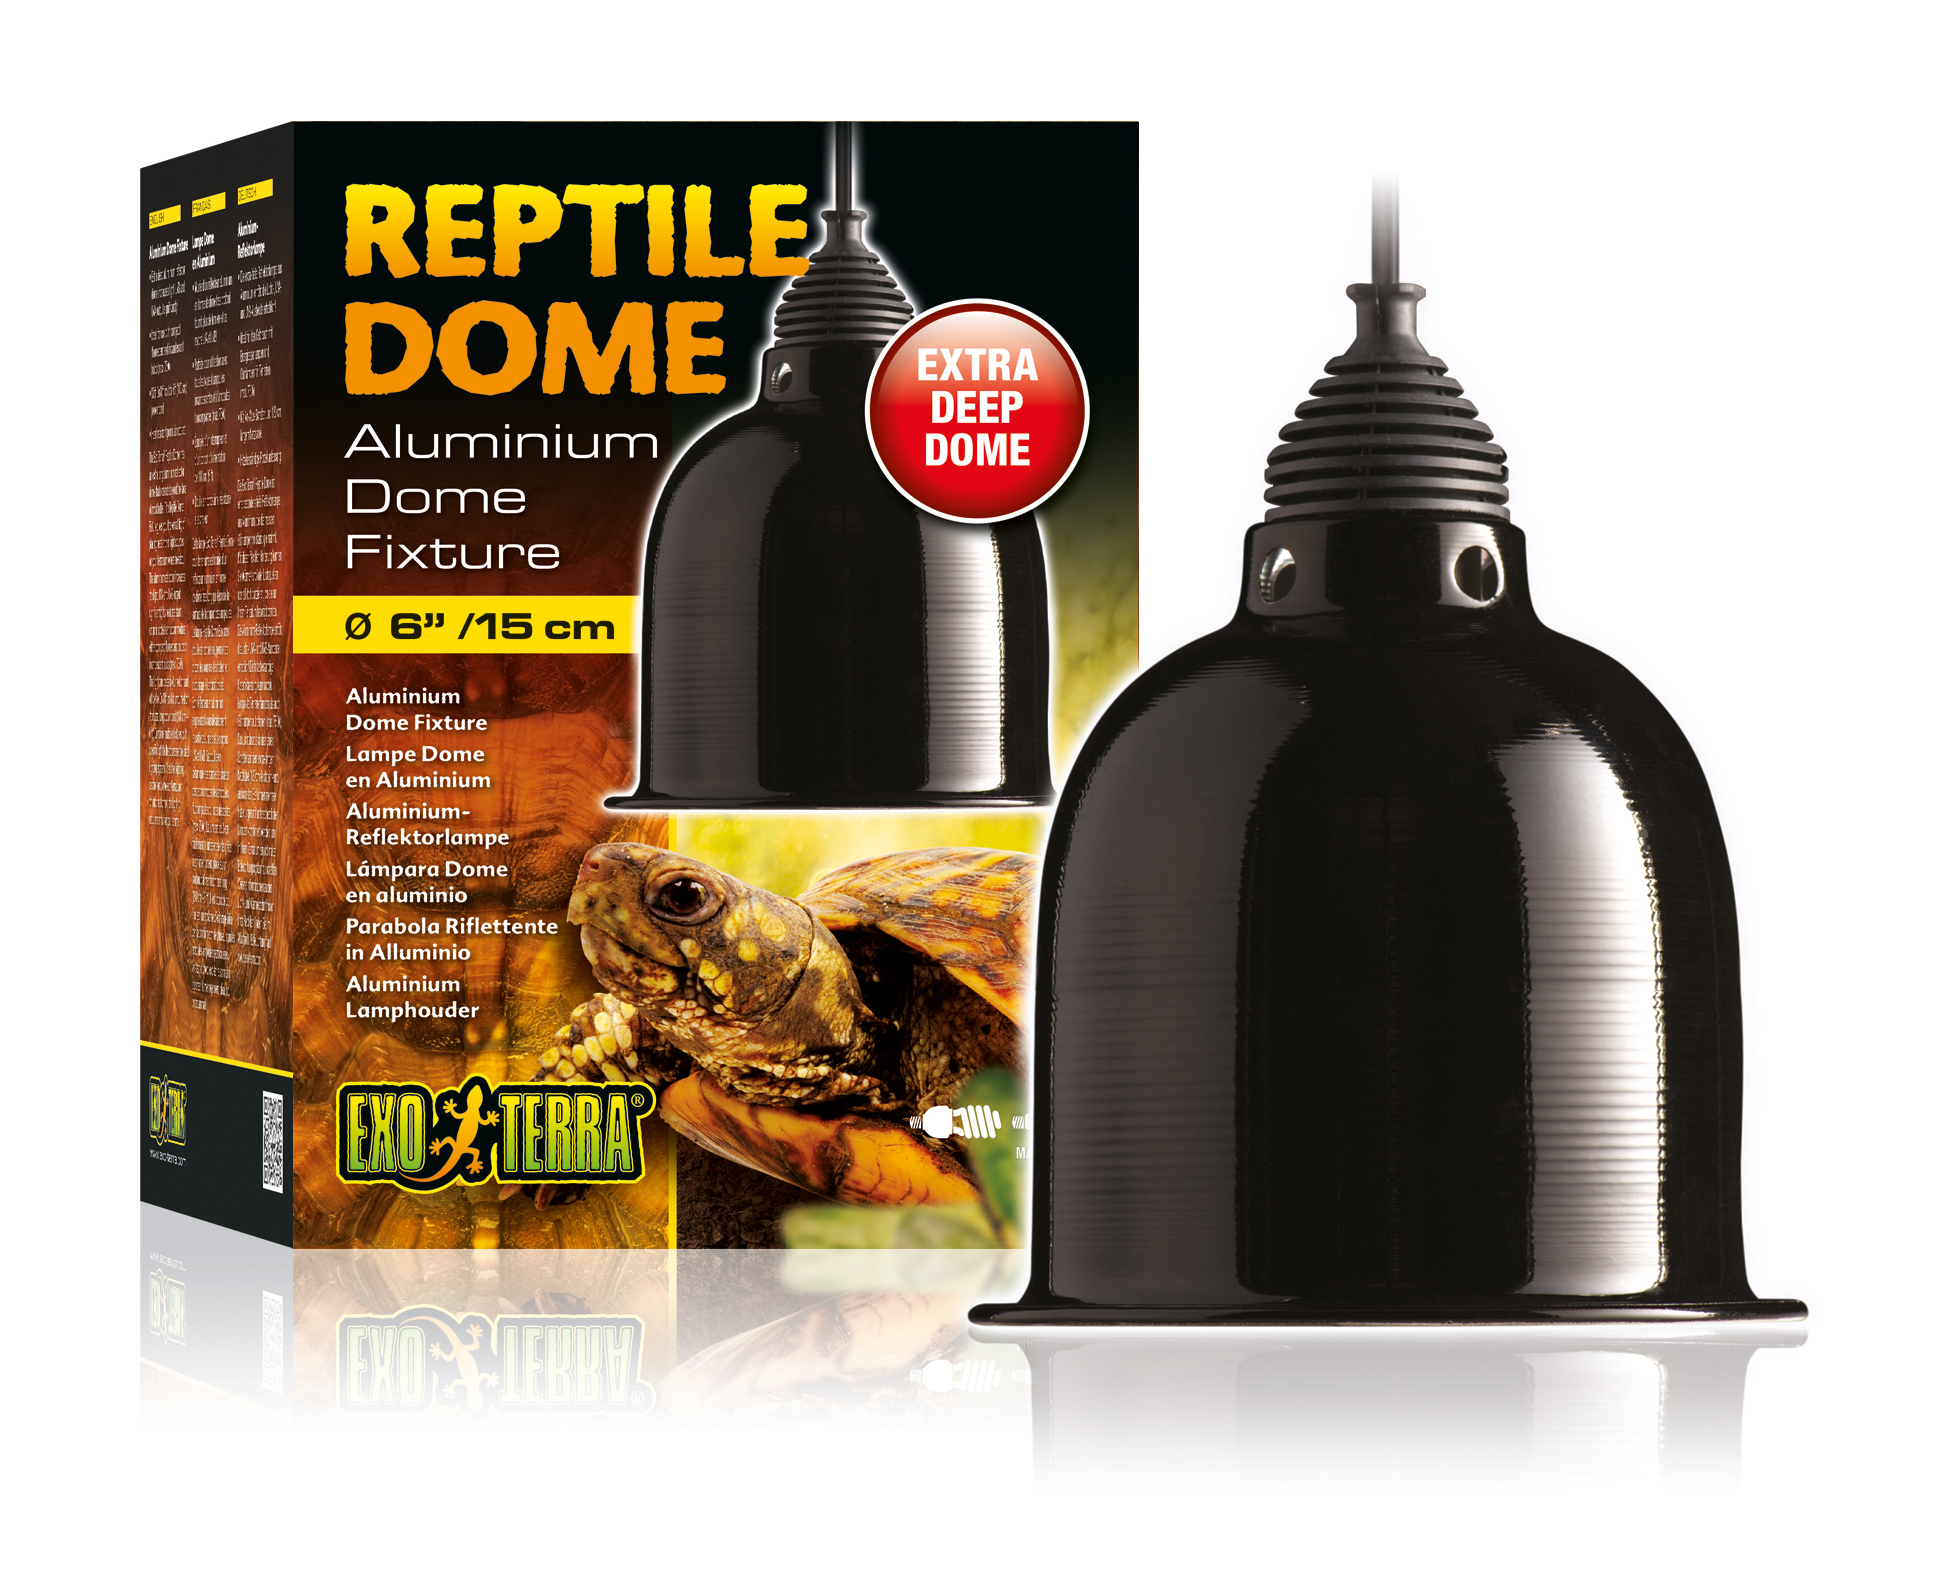 Ex reptile dome - <Product shot>